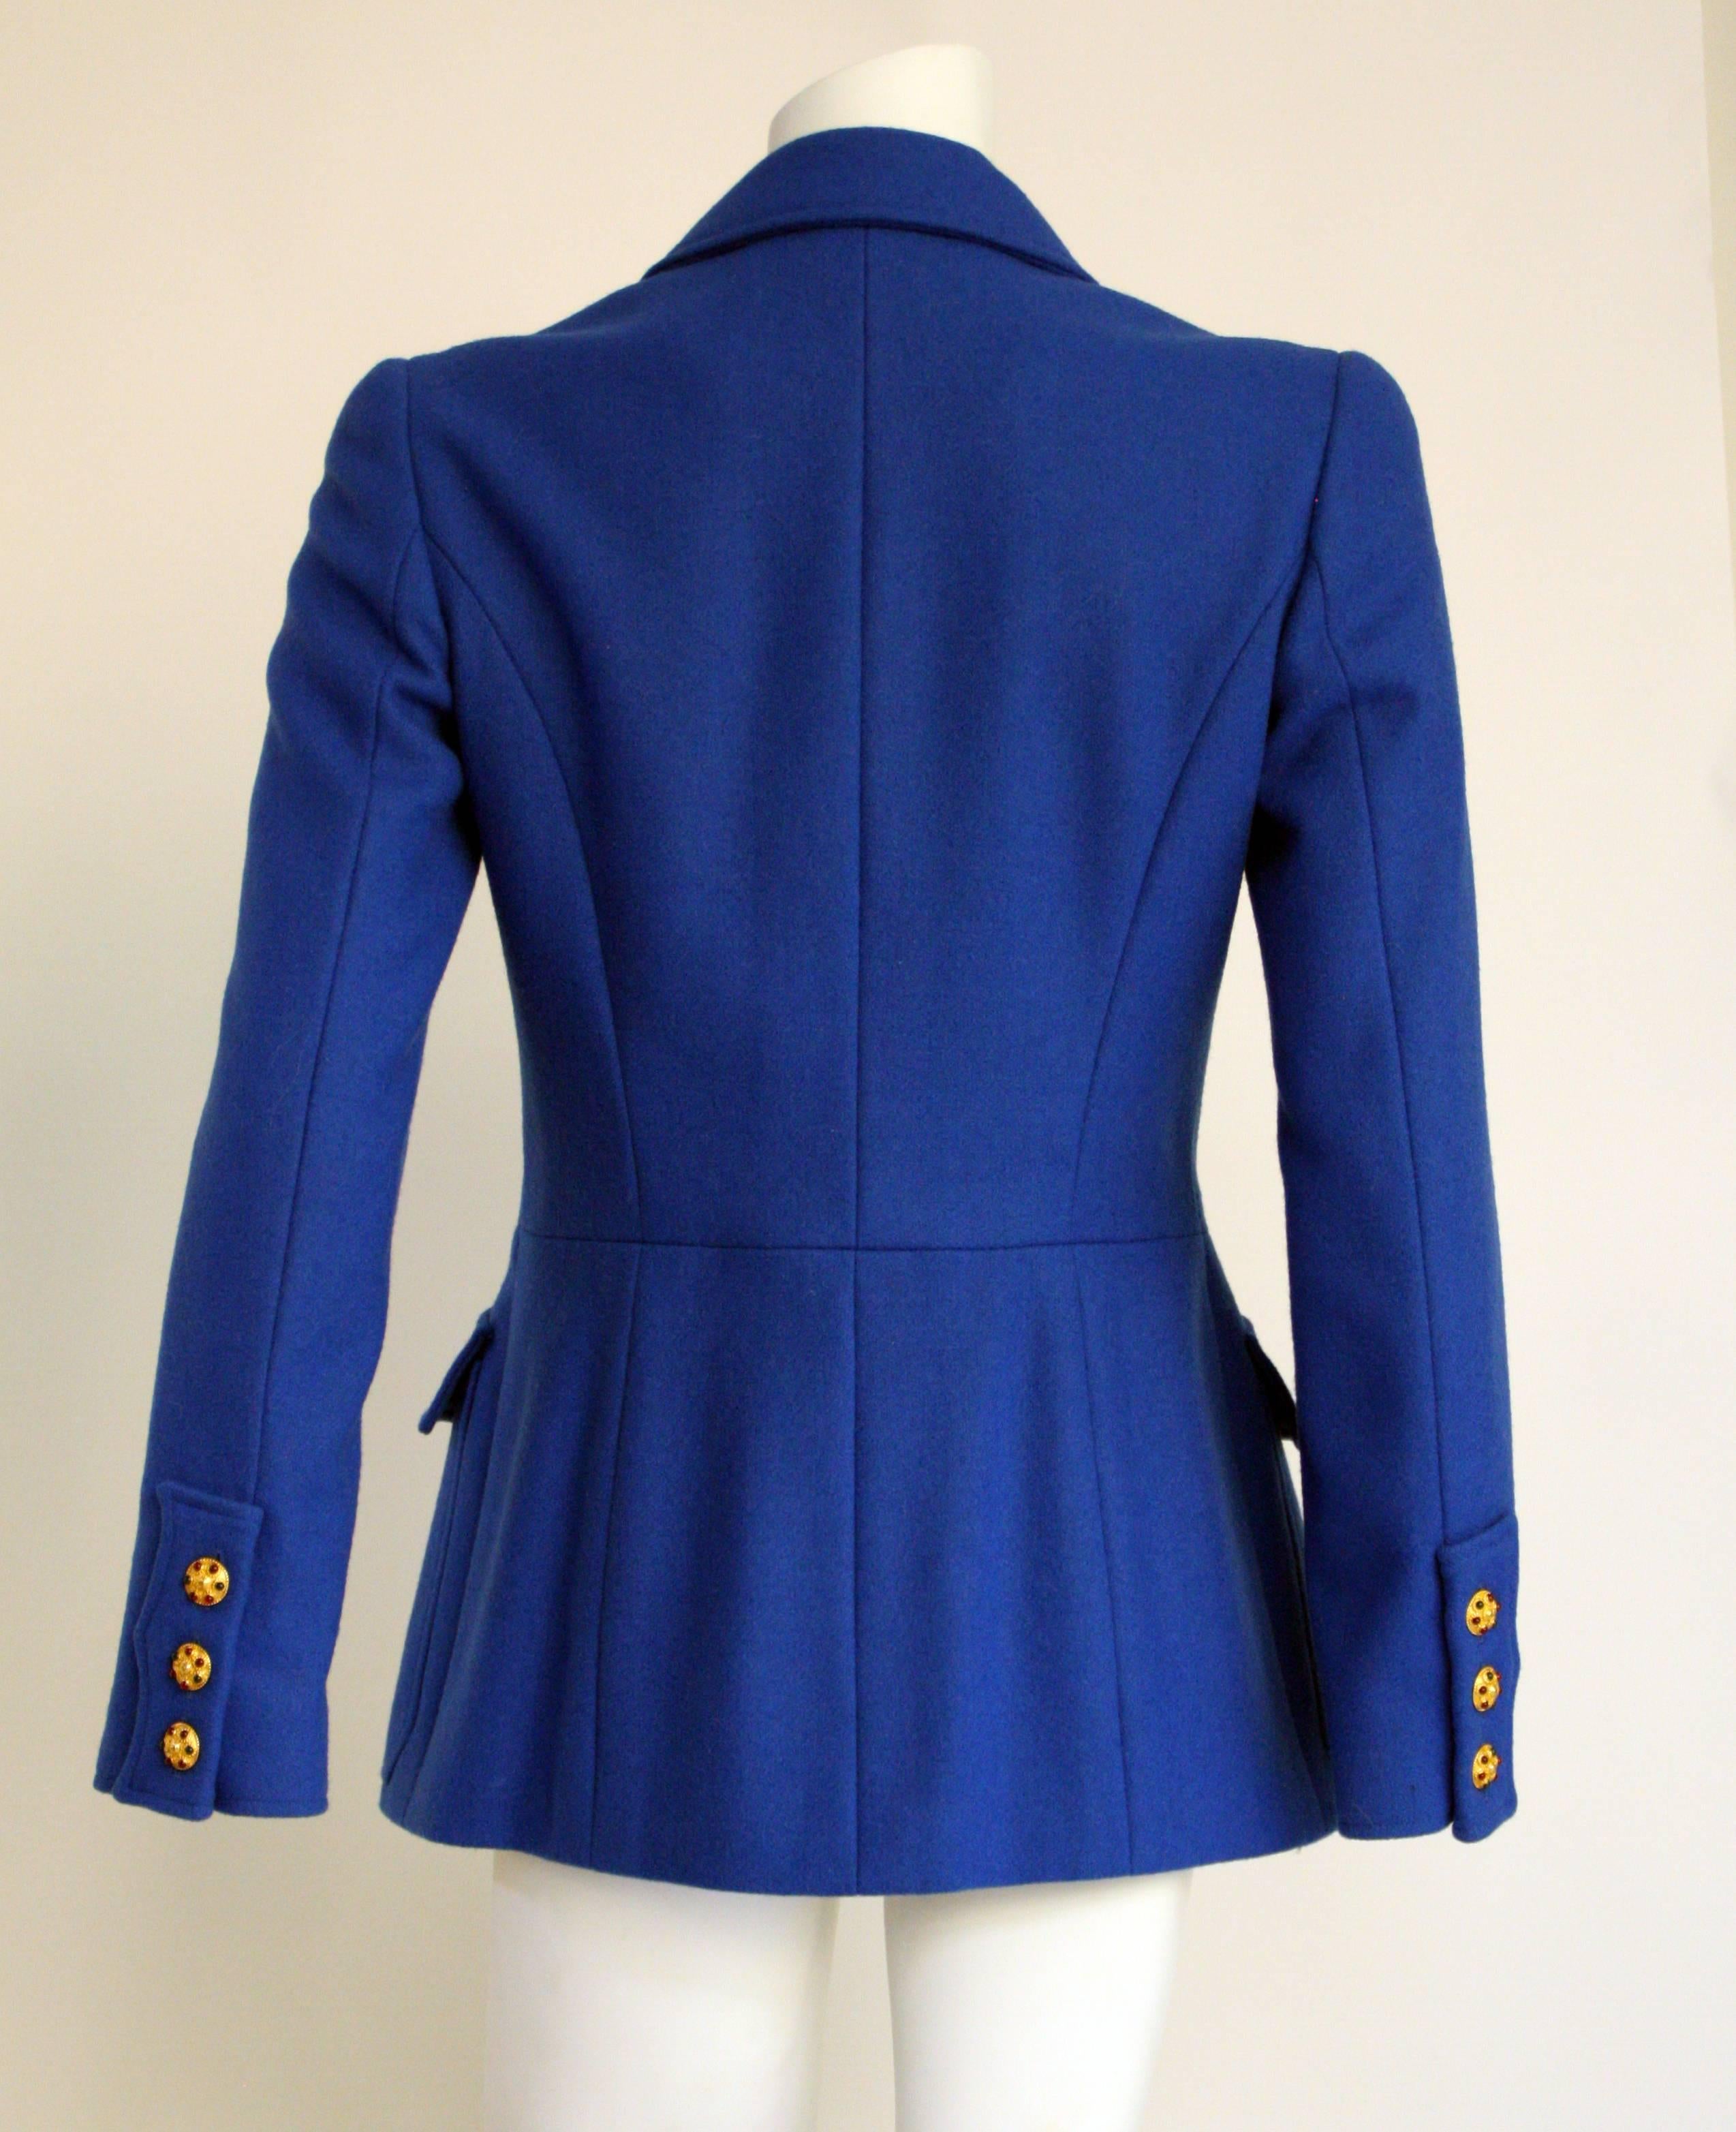 A 1996A Chanel royal blue melton wool jacket with frontal pockets and gold tone gripoix buttons down center front and sleeve cuffs. Features silk CC logo interior lining and gold tone chain at the hem. In excellent condition. Size tag